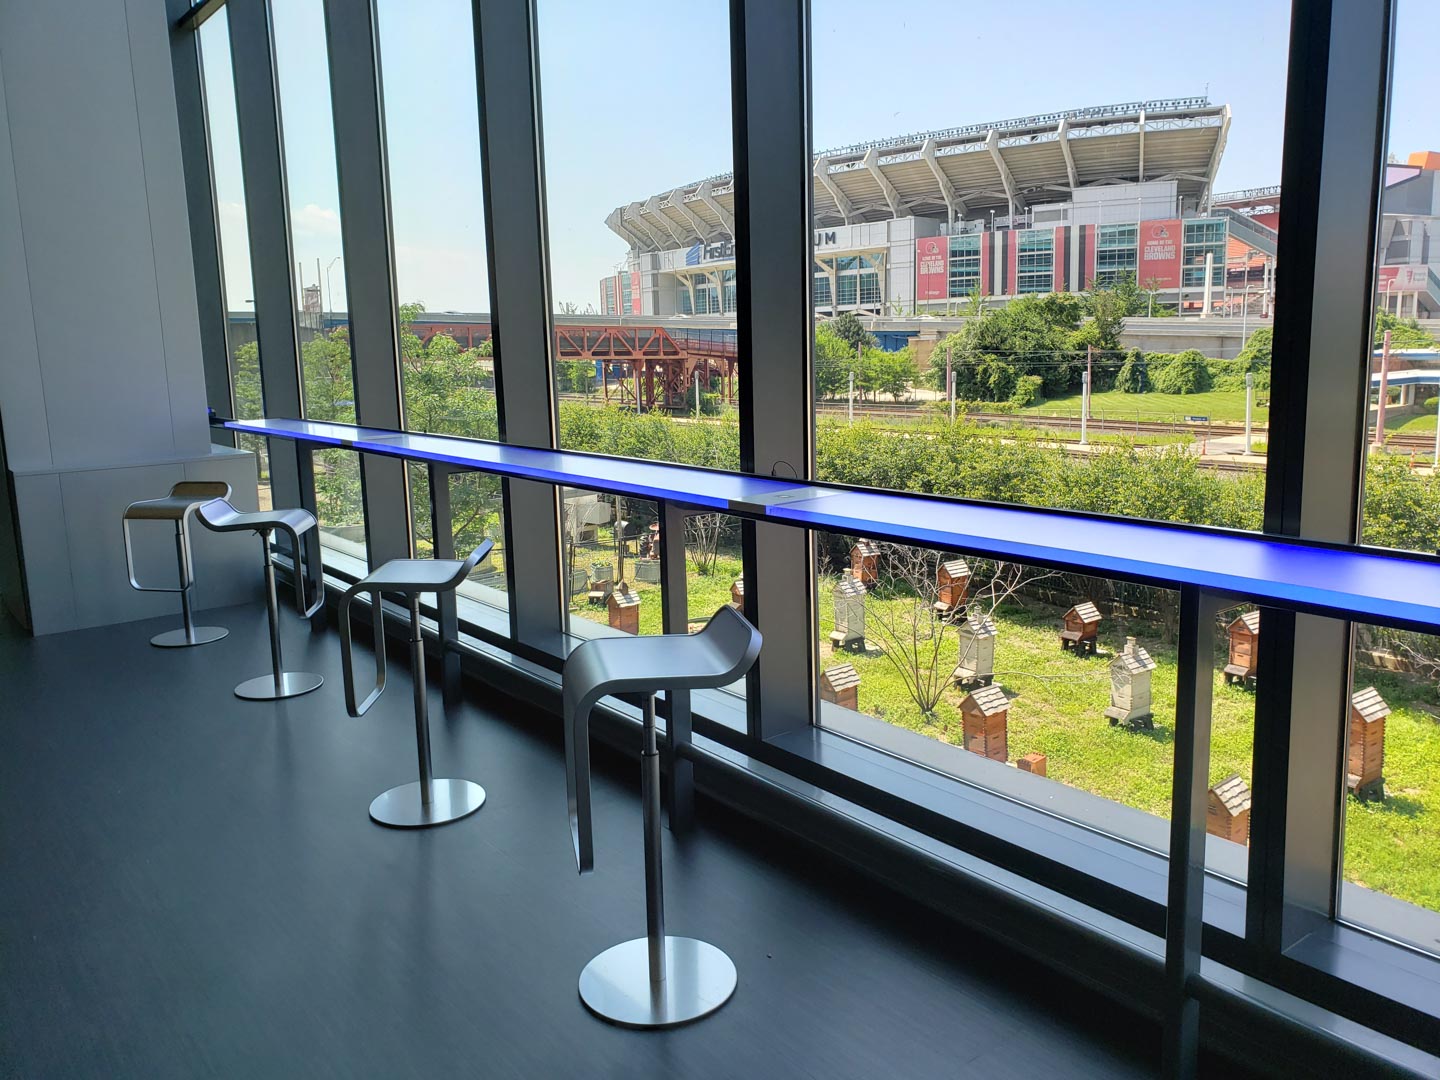 Bar seating with views to First Energy Stadium